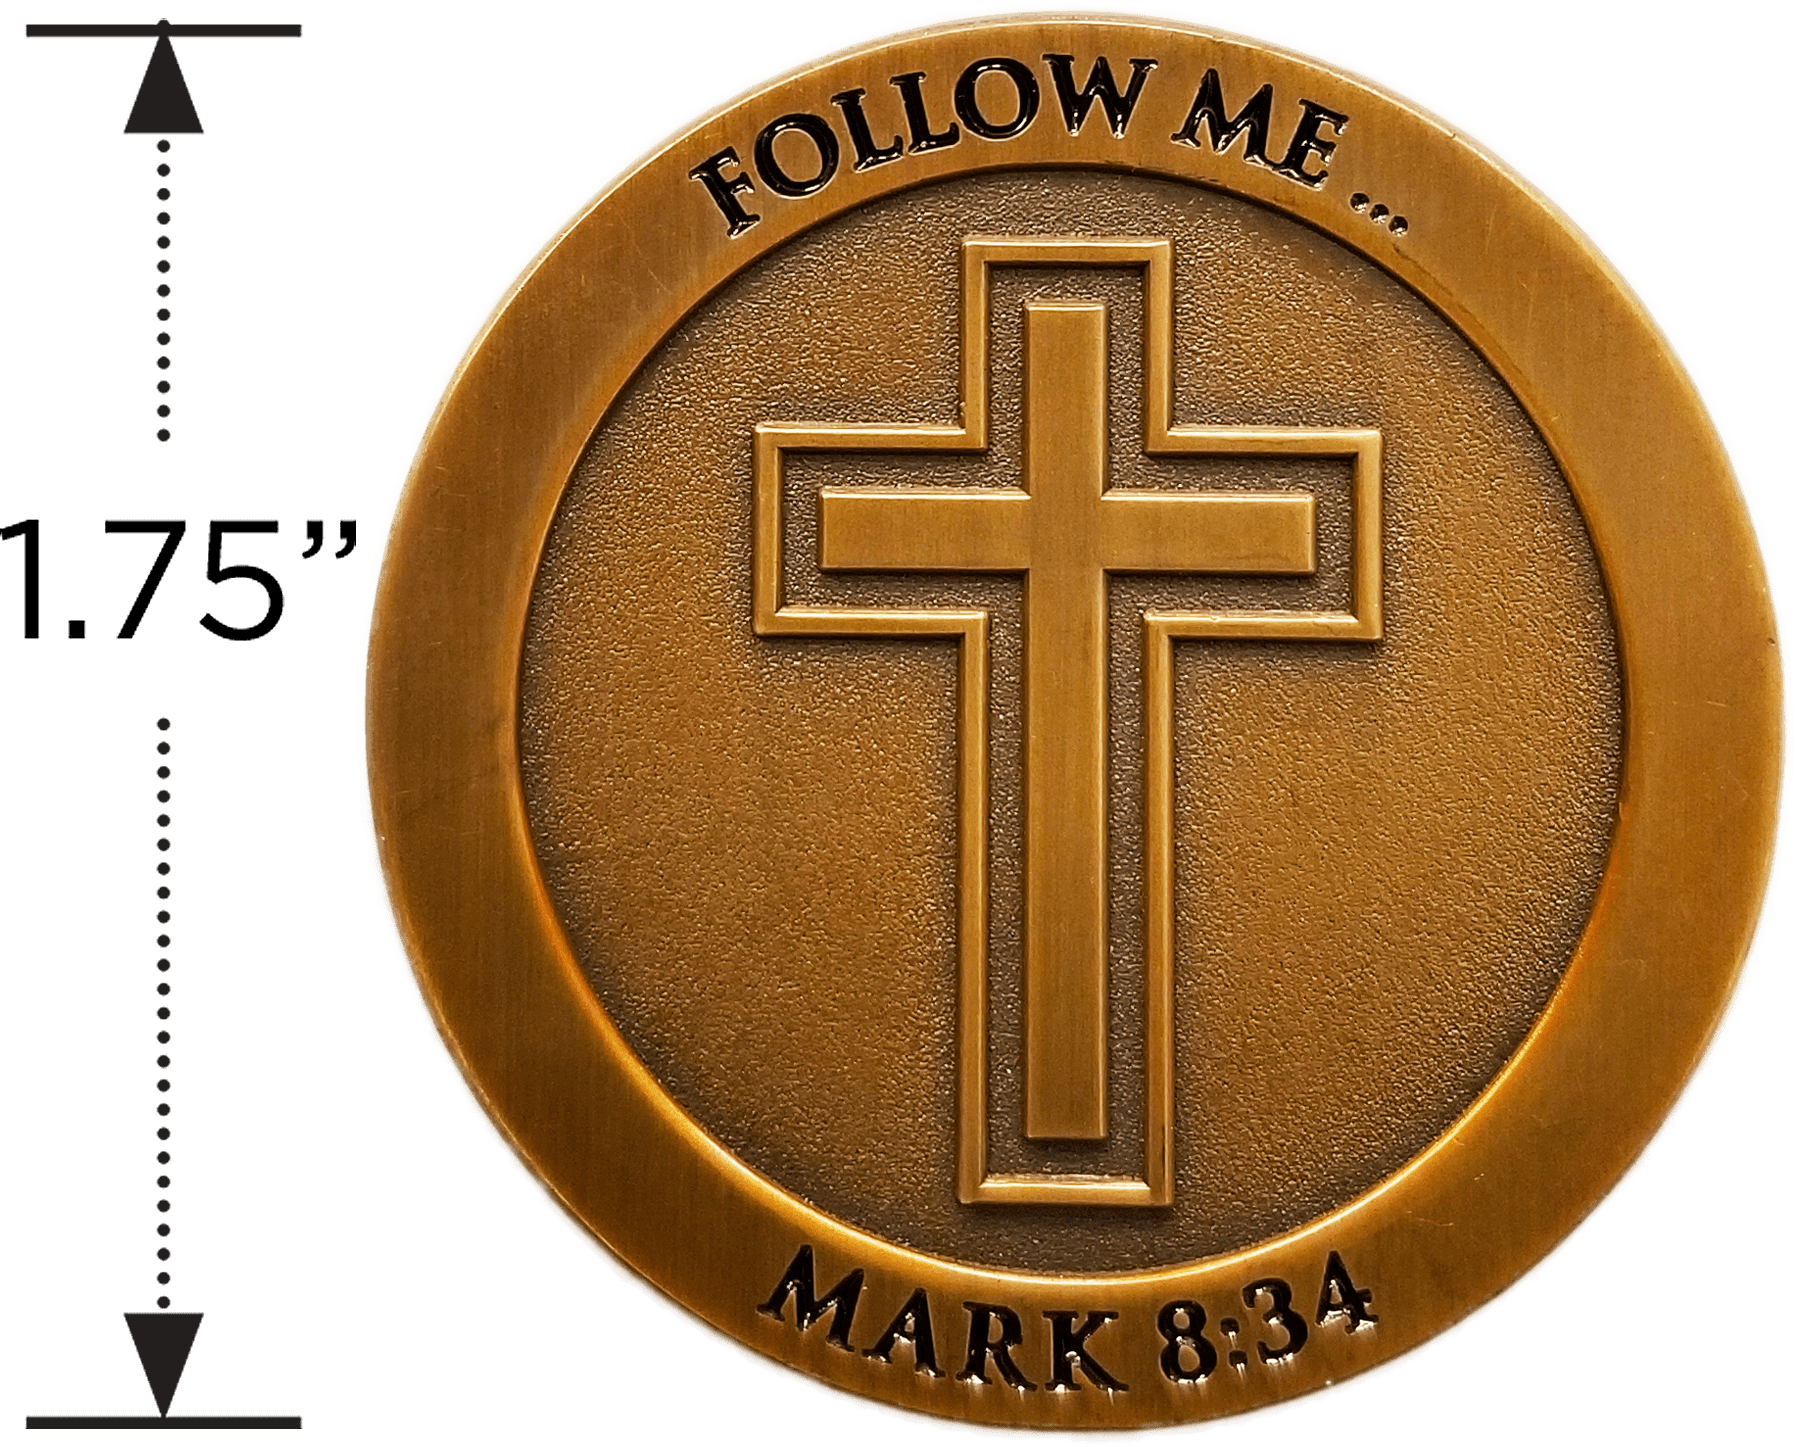 Follow Me Antique Gold Plated Christian Challenge Coin measured to show size diameter